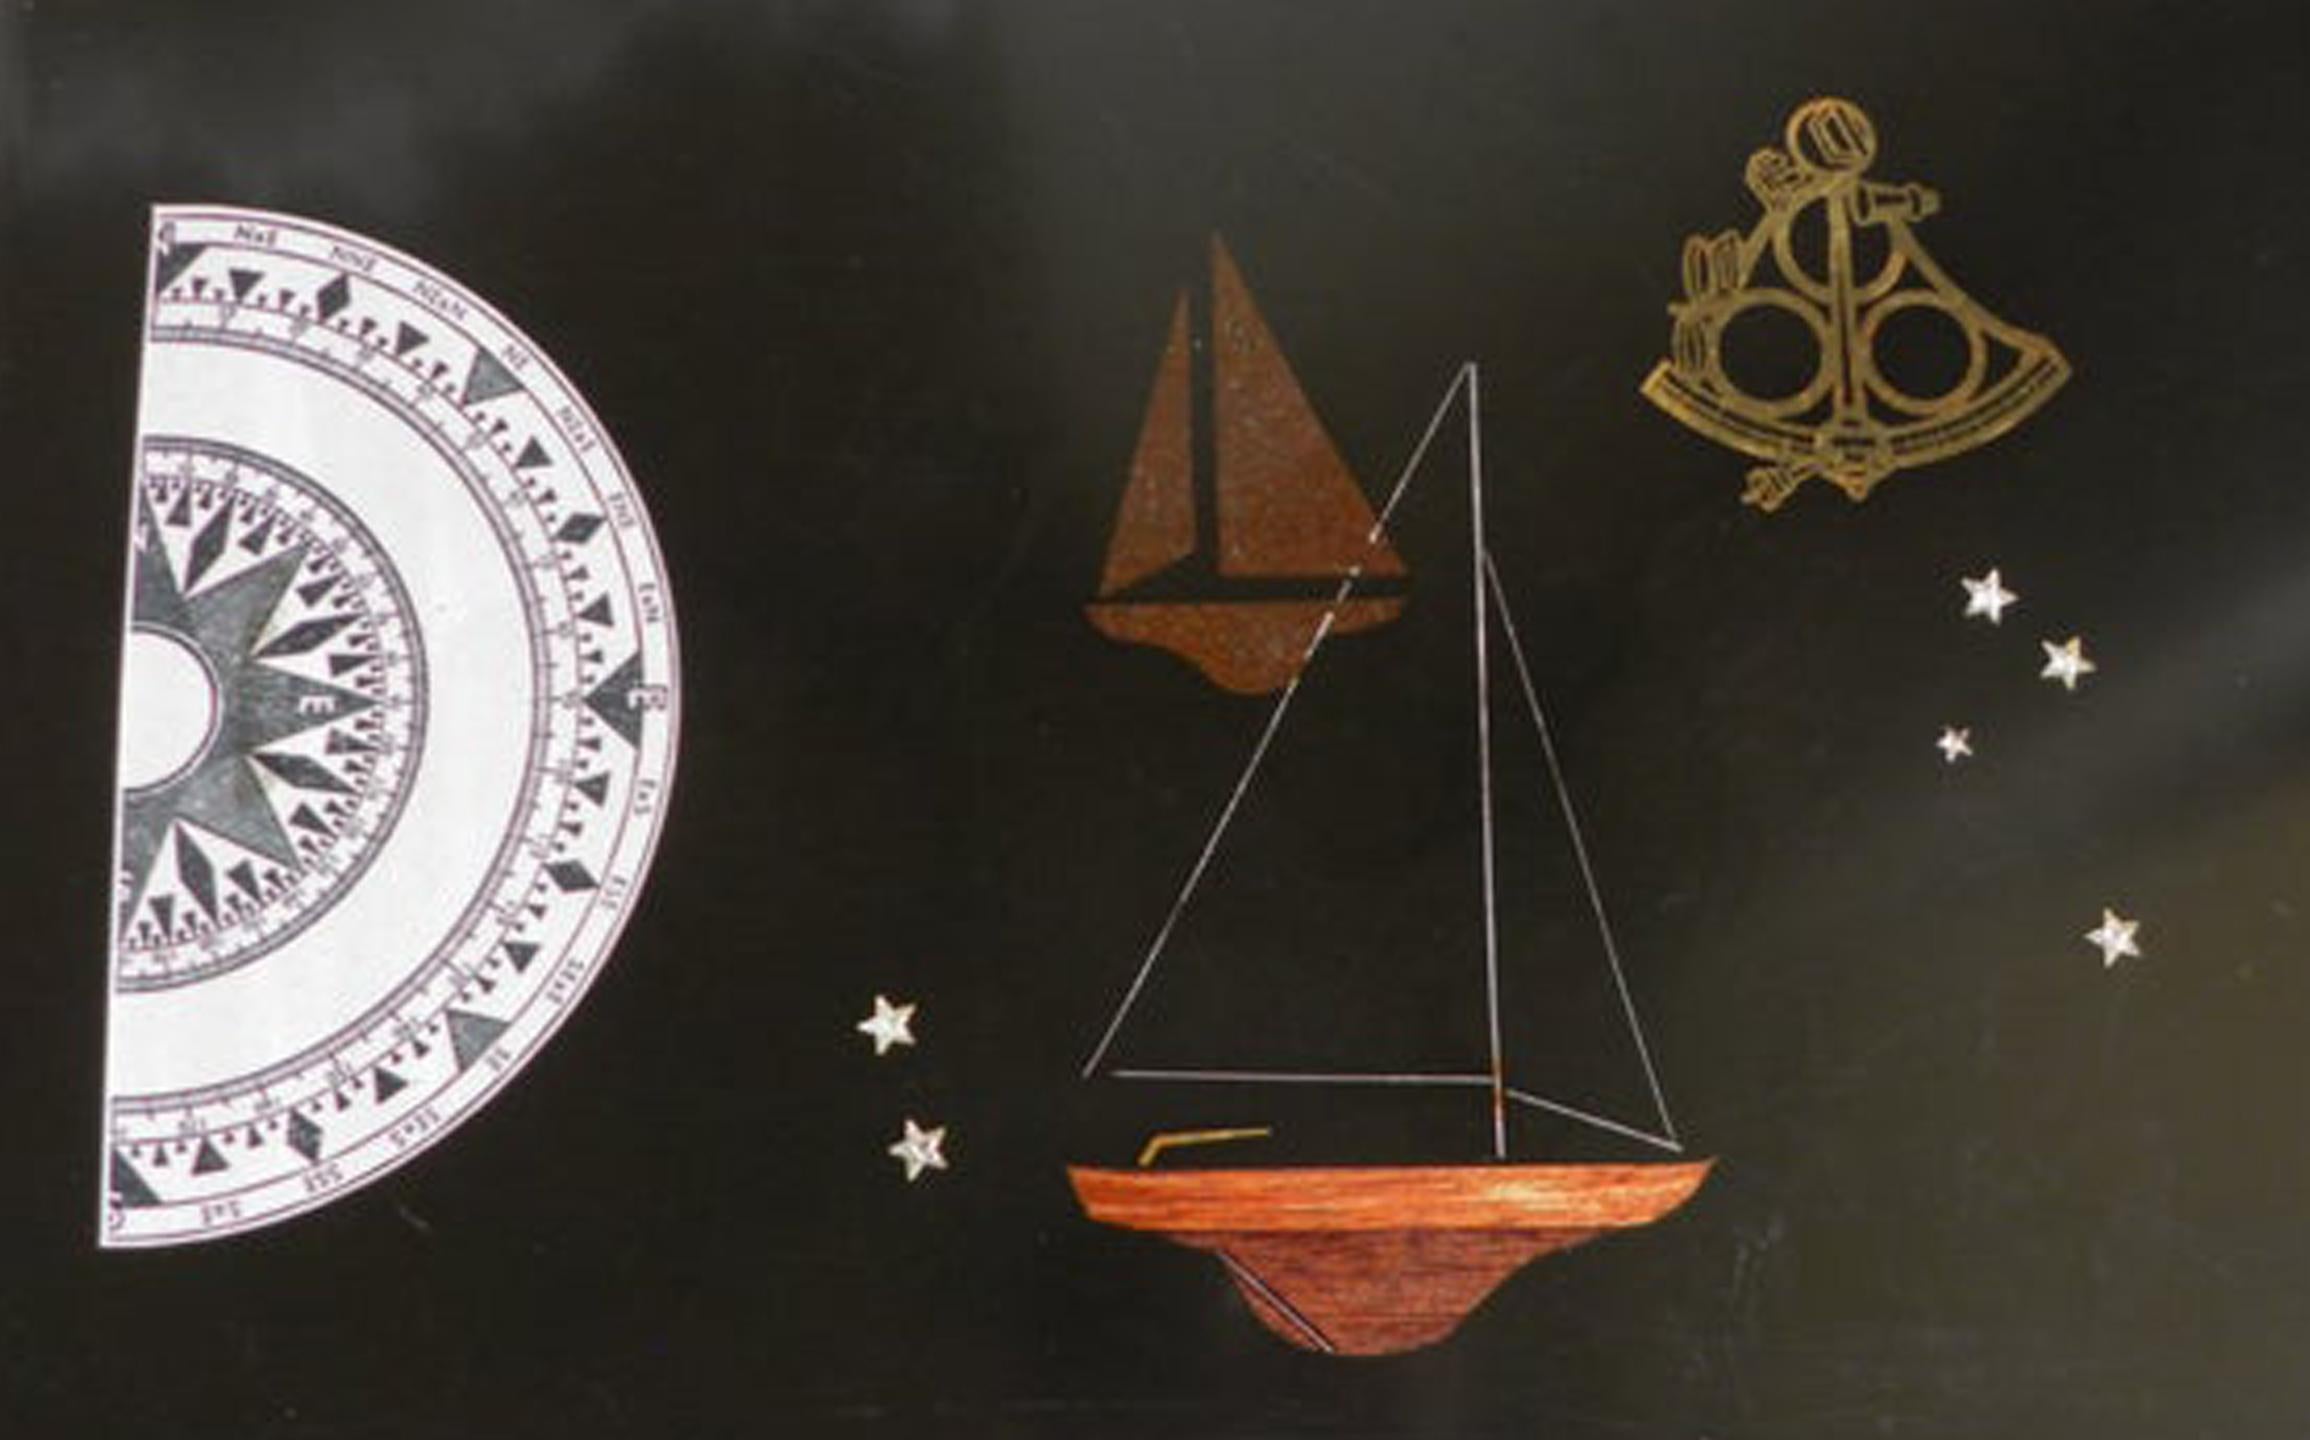 Couroc resin tray with sailing ships and compass,
The 1970s

The black resin rectangular tray is decorated with two sailing yachts with crystal stars to bow and stern. To the left is an ivory-colored compass and to the top right a bronze sextant.